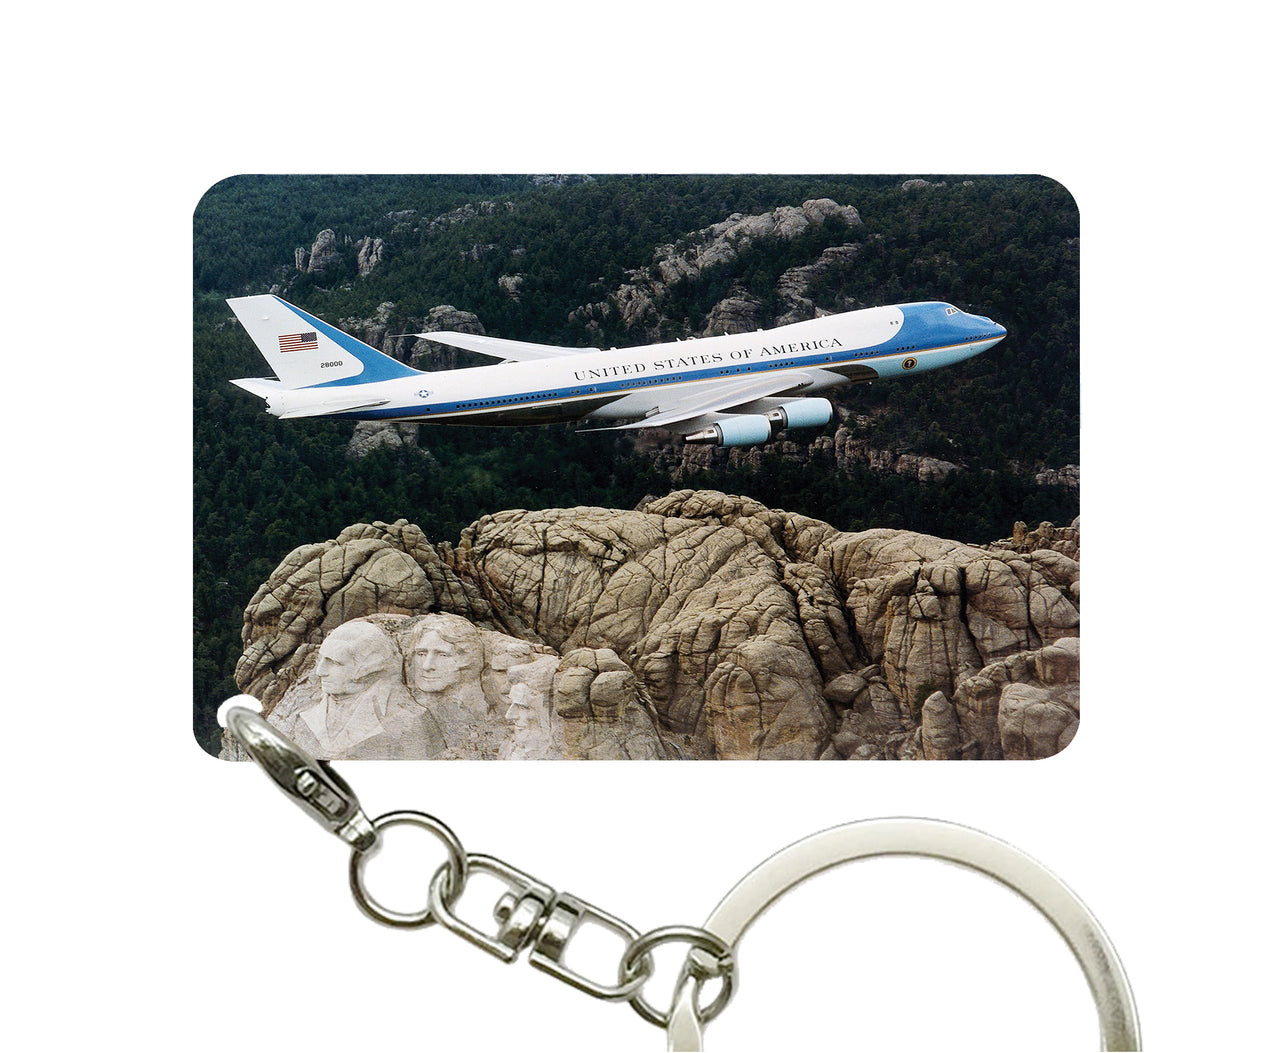 Cruising United States of America Boeing 747 Printed Pillows Designed Key Chains